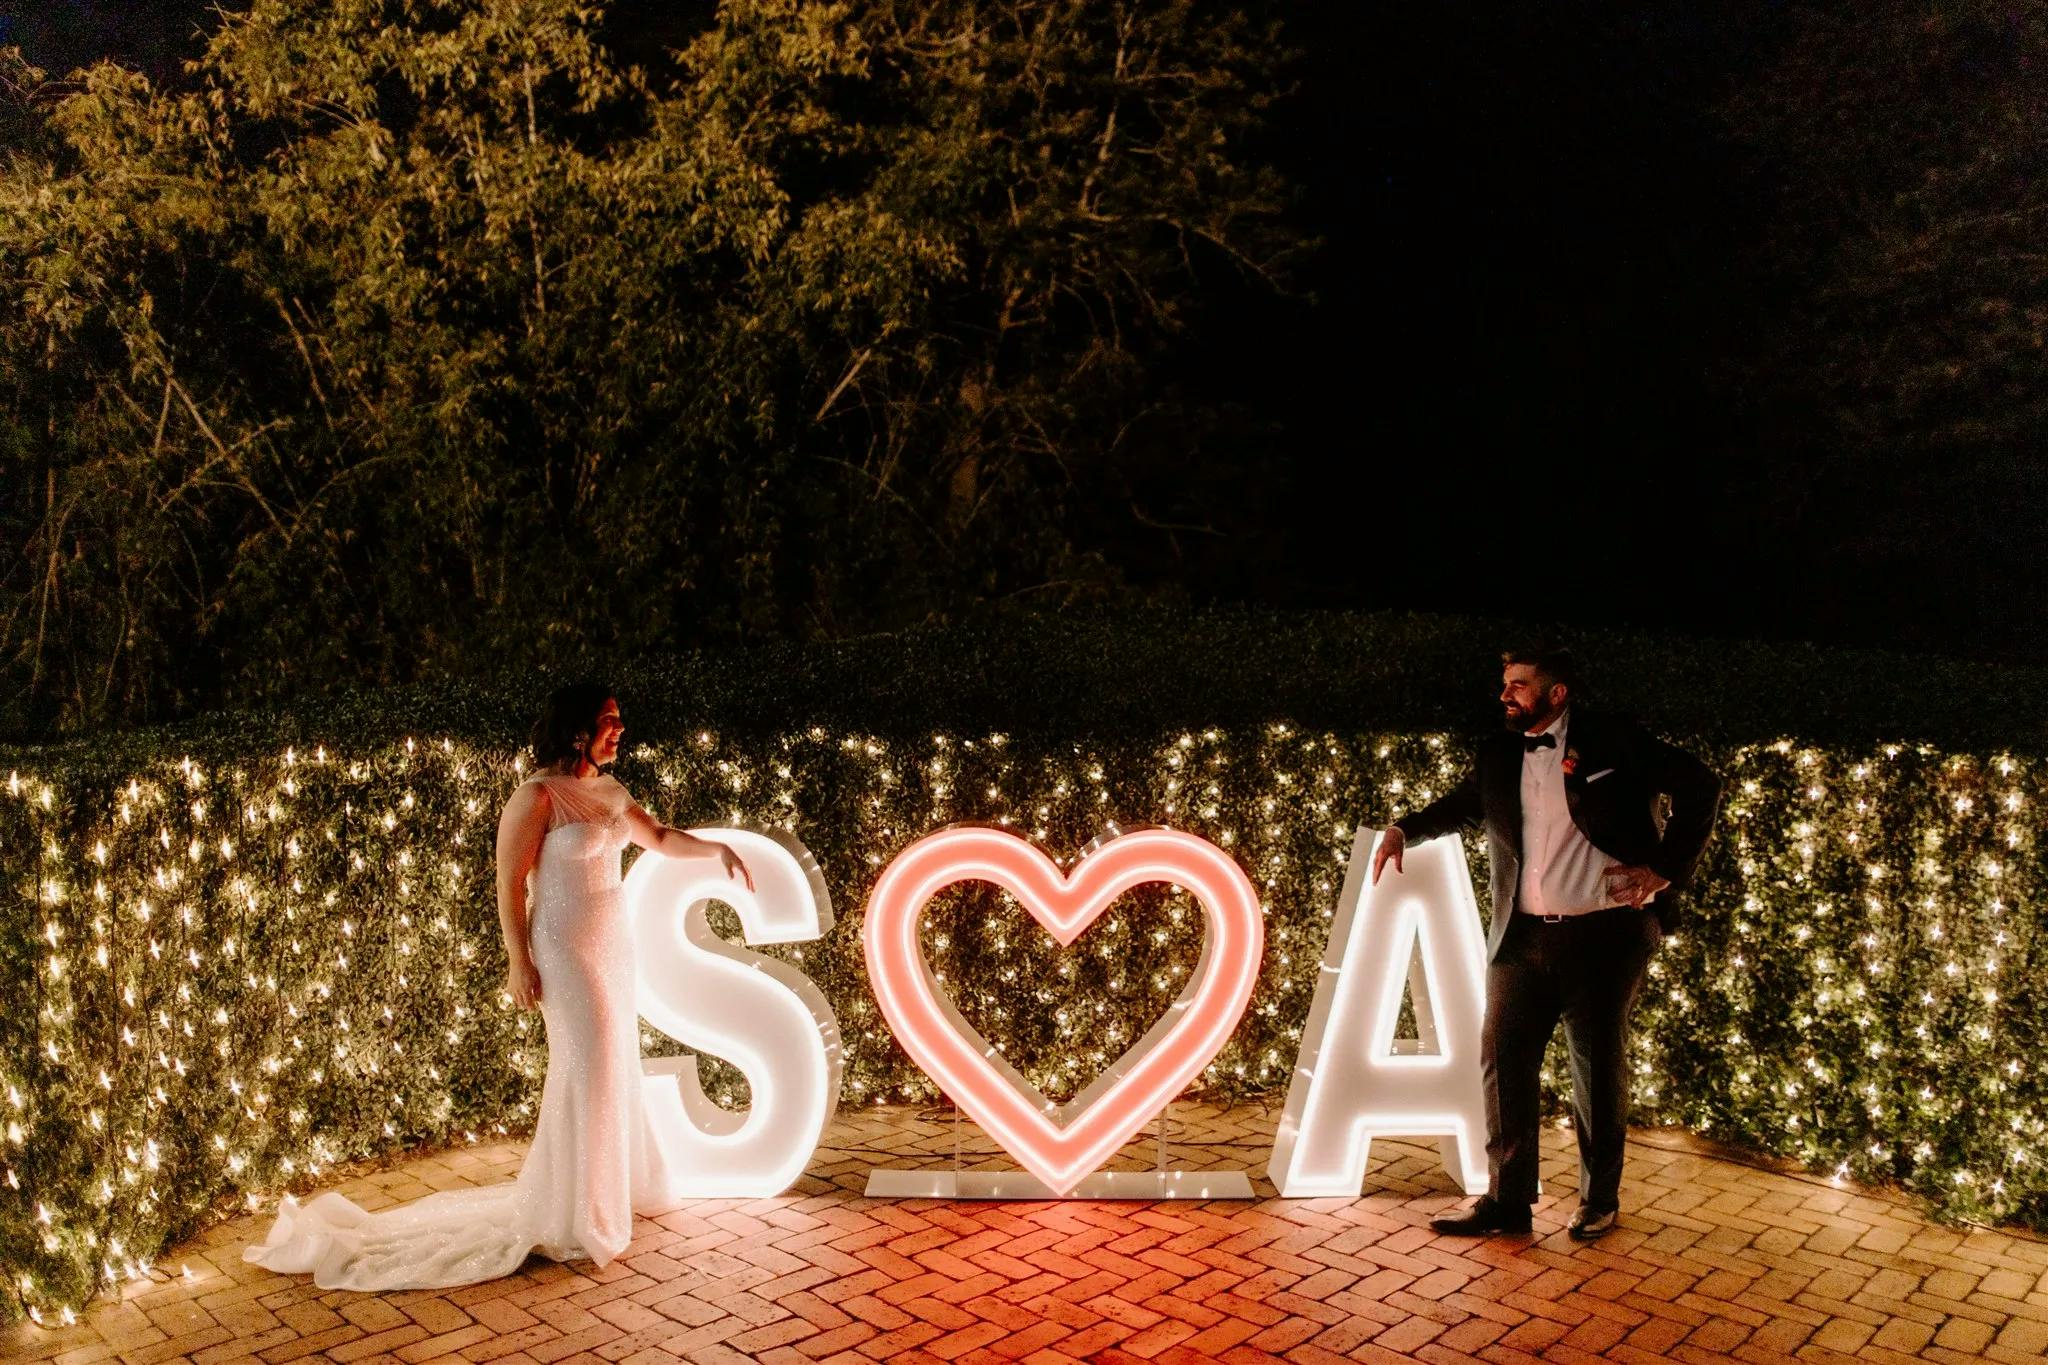 A couple, dressed in formal wedding attire, stands on either side of illuminated letters spelling "S (heart) A" in front of a hedge adorned with fairy lights. The bride is on the left in a white dress, and the groom is on the right wearing a tuxedo.